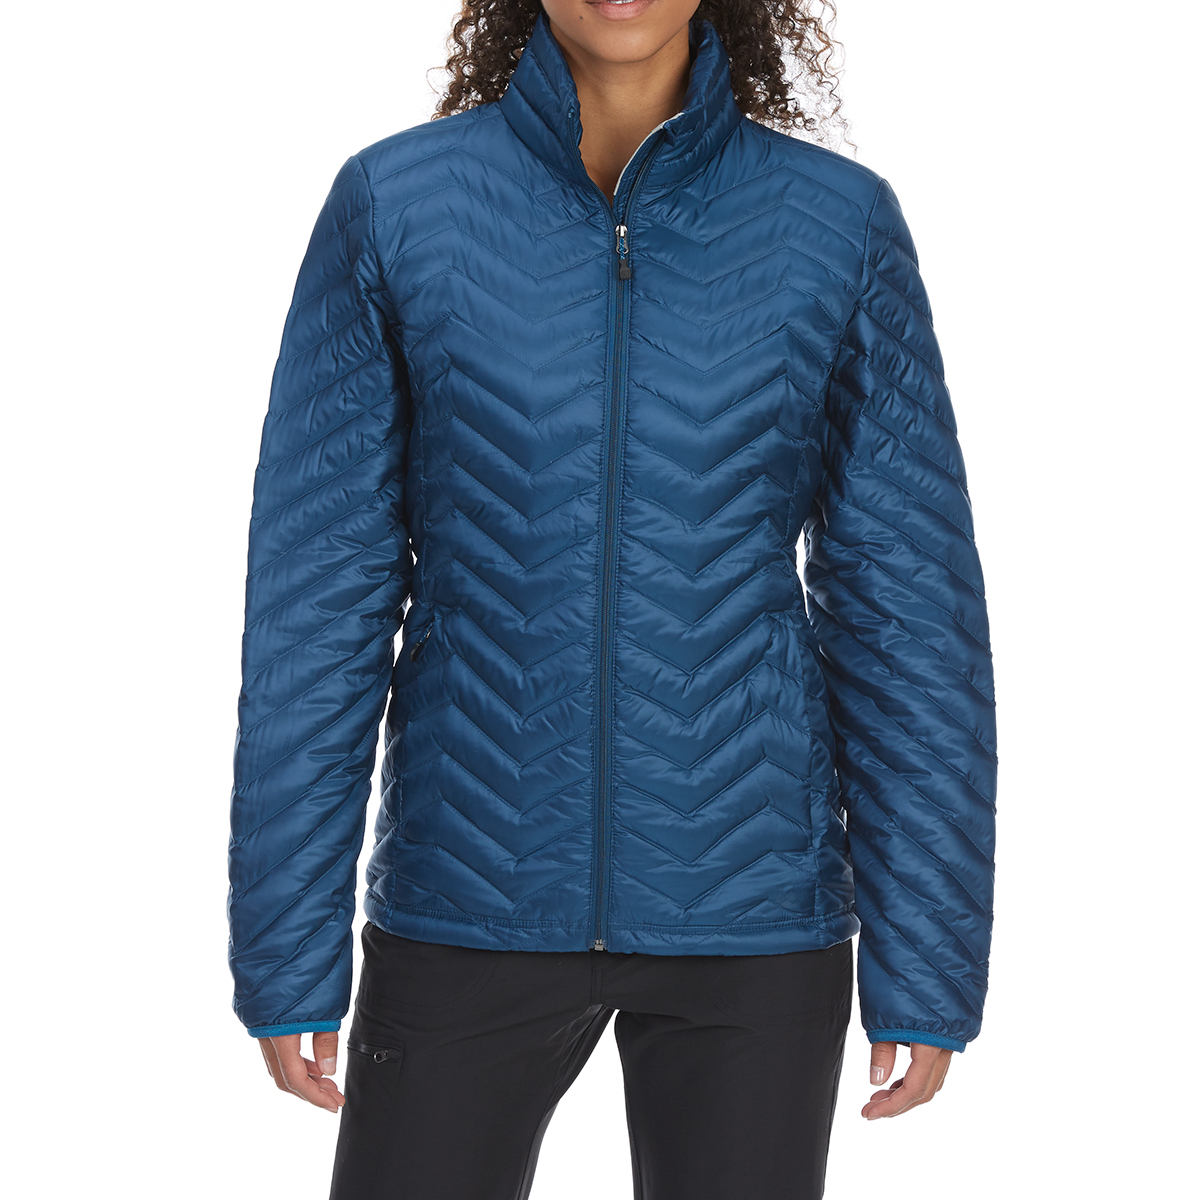 Ems Women's Feather Pack Jacket - Blue, M